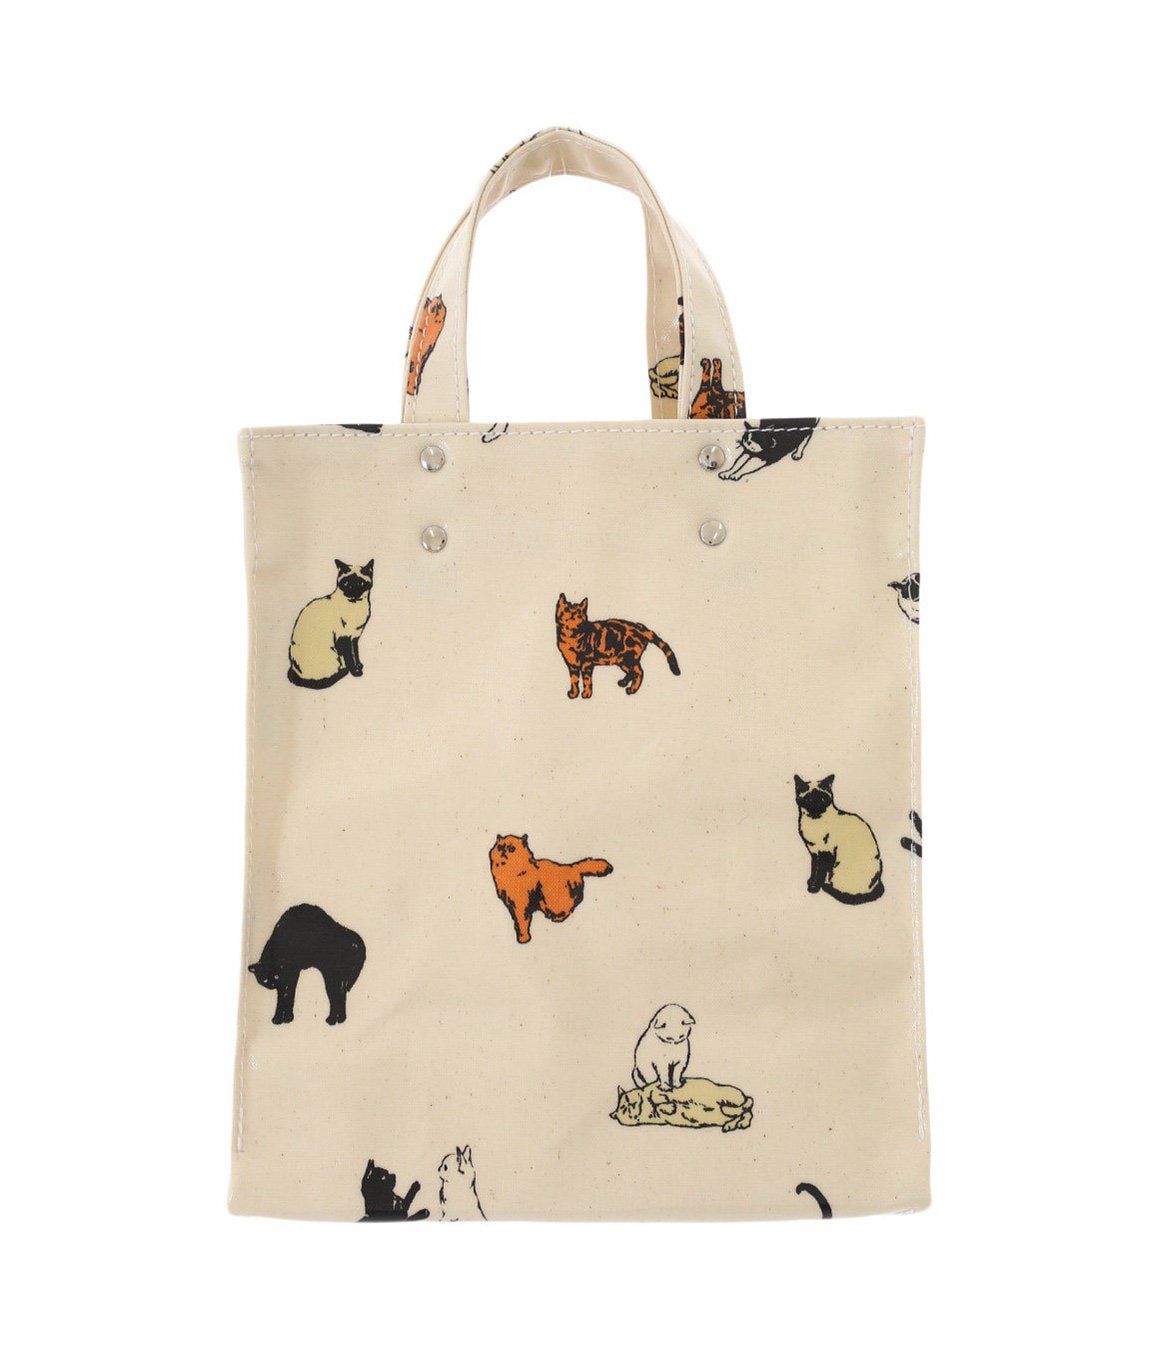 PAPER TOTE SMALL -CAT- | TEMBEA(テンベア) / バッグ トートバッグ